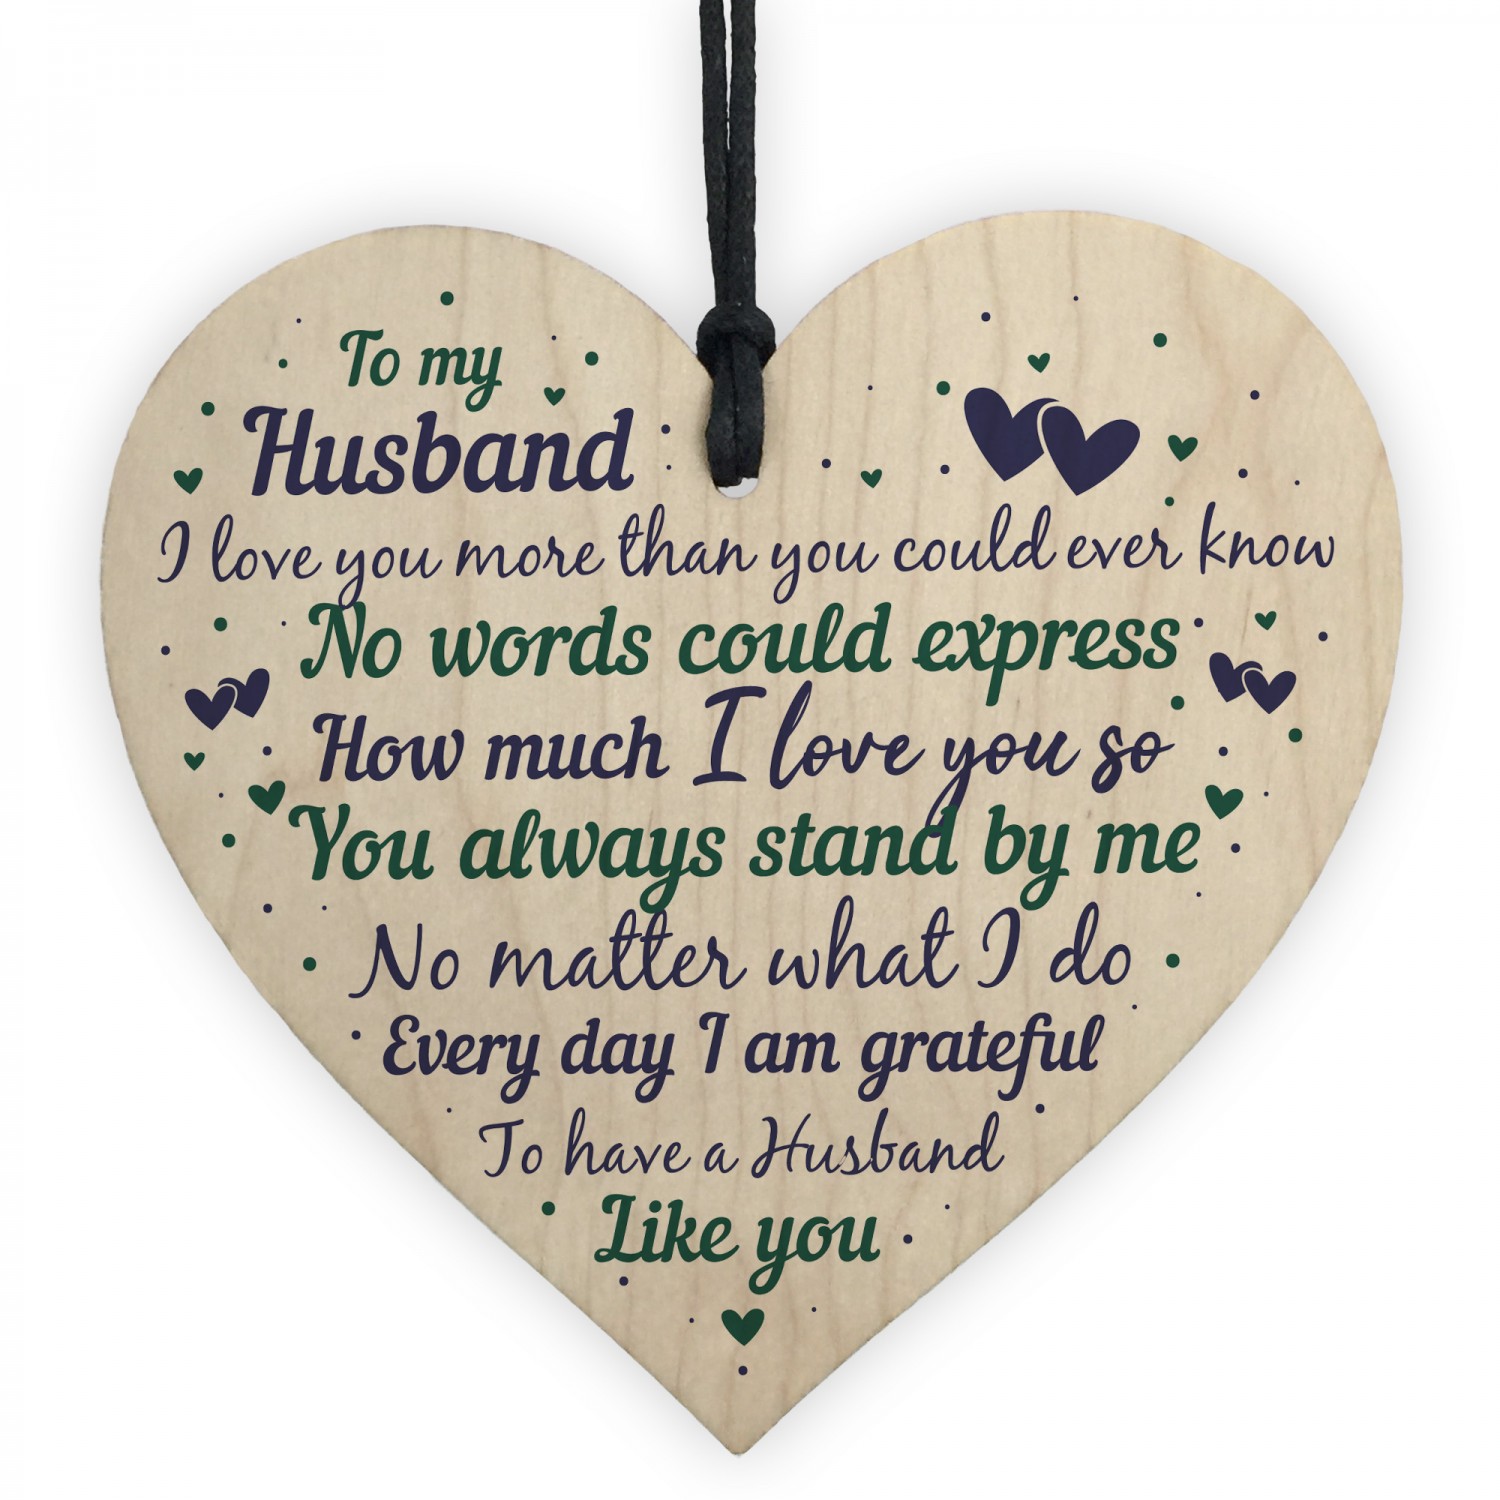 Husband Anniversary Gifts
 Husband Anniversary Gift From Wife Handmade Wooden Heart Poem